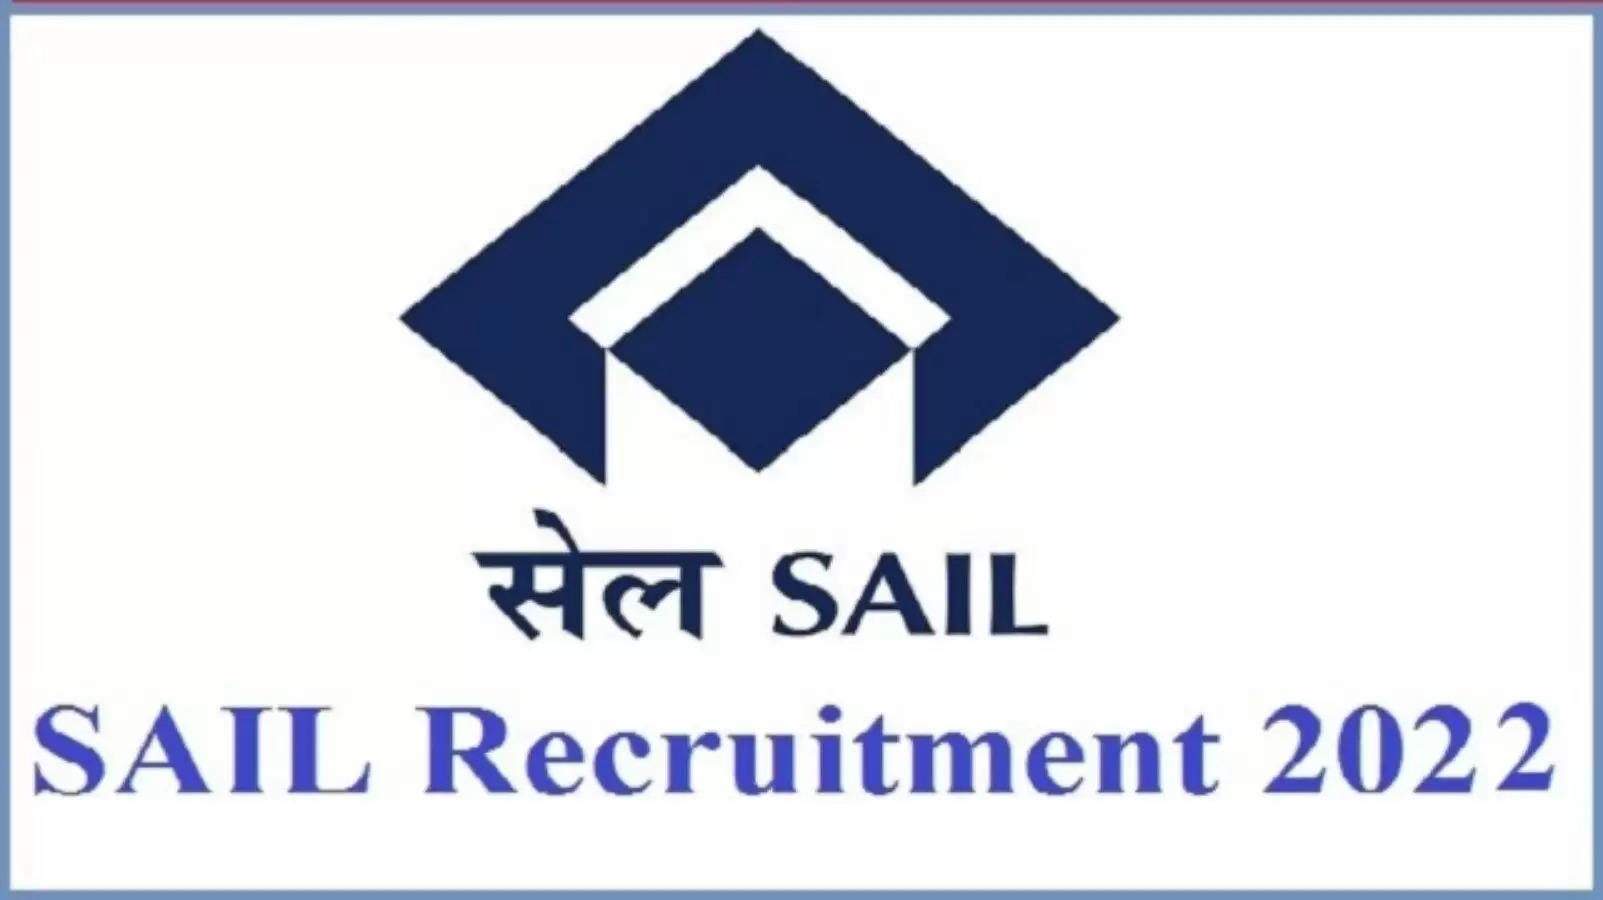  SAIL Recruitment 2022: A great opportunity has emerged to get a job (Sarkari Naukri) in Steel Authority of India Limited (SAIL), Rourkela (SAIL). SAIL has sought applications to fill Consultant, Medical Officer and other posts (SAIL Recruitment 2022). Interested and eligible candidates who want to apply for these vacant posts (SAIL Recruitment 2022), can apply by visiting SAIL's official website sail.co.in. The last date to apply for these posts (SAIL Recruitment 2022) is 17 December.    Apart from this, candidates can also apply for these posts (SAIL Recruitment 2022) by directly clicking on this official link sail.co.in. If you want more detailed information related to this recruitment, then you can see and download the official notification (SAIL Recruitment 2022) through this link SAIL Recruitment 2022 Notification PDF. A total of 259 posts will be filled under this recruitment (SAIL Recruitment 2022) process.    Important Dates for SAIL Recruitment 2022  Online Application Starting Date –  Last date for online application - 17 December  Details of posts for SAIL Recruitment 2022  Total No. of Posts- Posts-259  Eligibility Criteria for SAIL Recruitment 2022  Consultant, Medical Officer & Other - Graduation from recognized Institute with experience  Age Limit for SAIL Recruitment 2022  Consultant, Medical Officer and others - The maximum age of the candidates will be valid as per the rules of the department.  Salary for SAIL Recruitment 2022  Consultant, Medical Officer and others - As per the rules of the department  Selection Process for SAIL Recruitment 2022  Will be done on the basis of written test.  How to apply for SAIL Recruitment 2022  Interested and eligible candidates can apply through the official website of SAIL (sail.co.in) till 17 December. For detailed information in this regard, refer to the official notification given above.    If you want to get a government job, then apply for this recruitment before the last date and fulfill your dream of getting a government job. You can visit naukrinama.com for more such latest government jobs information.